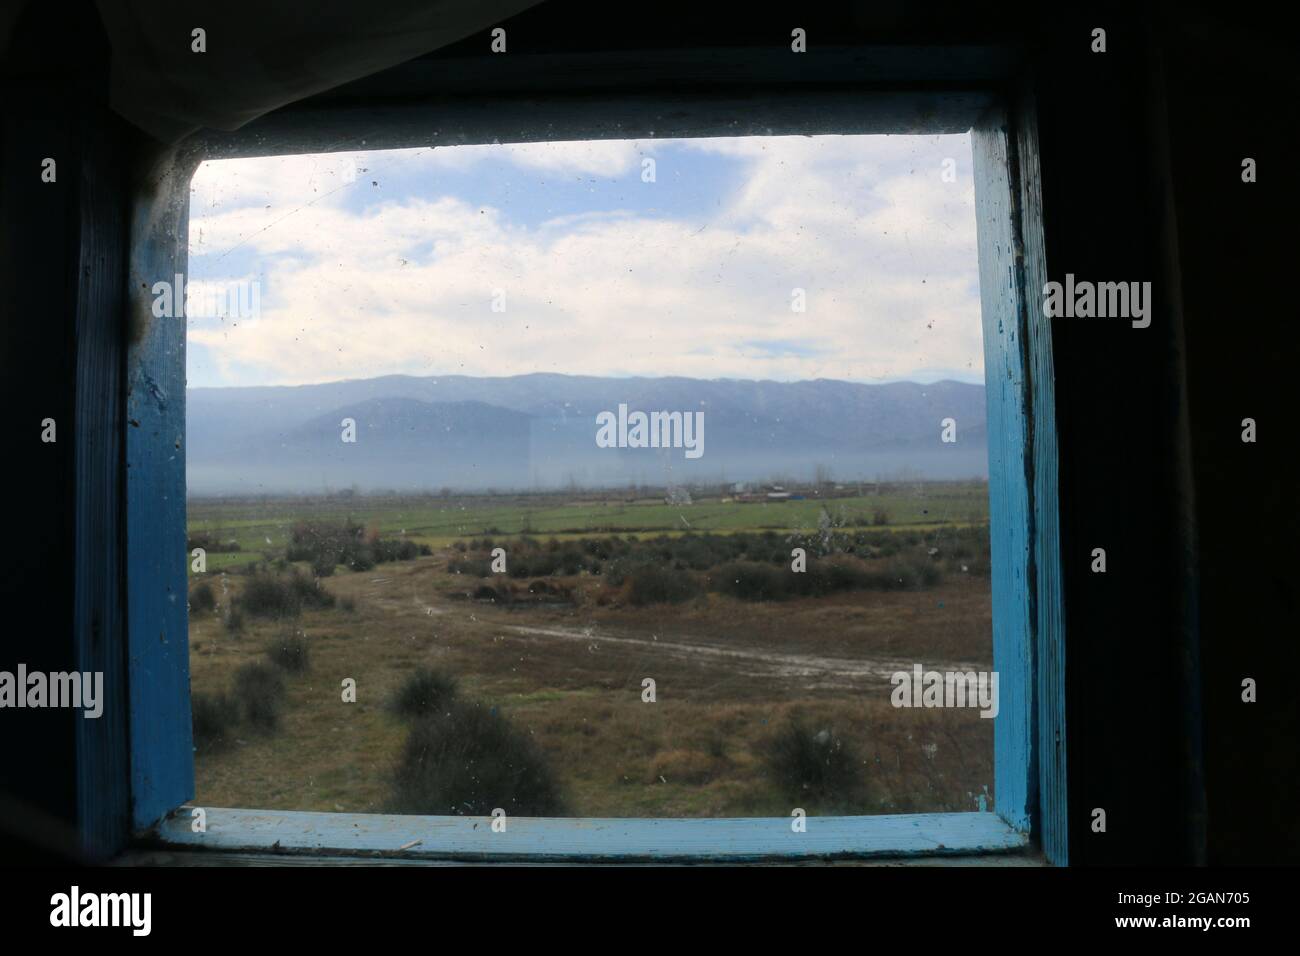 In the spring, from the window of a country house, I saw a view like life! The people of the Turkmen desert are like the view from this window, simple Stock Photo